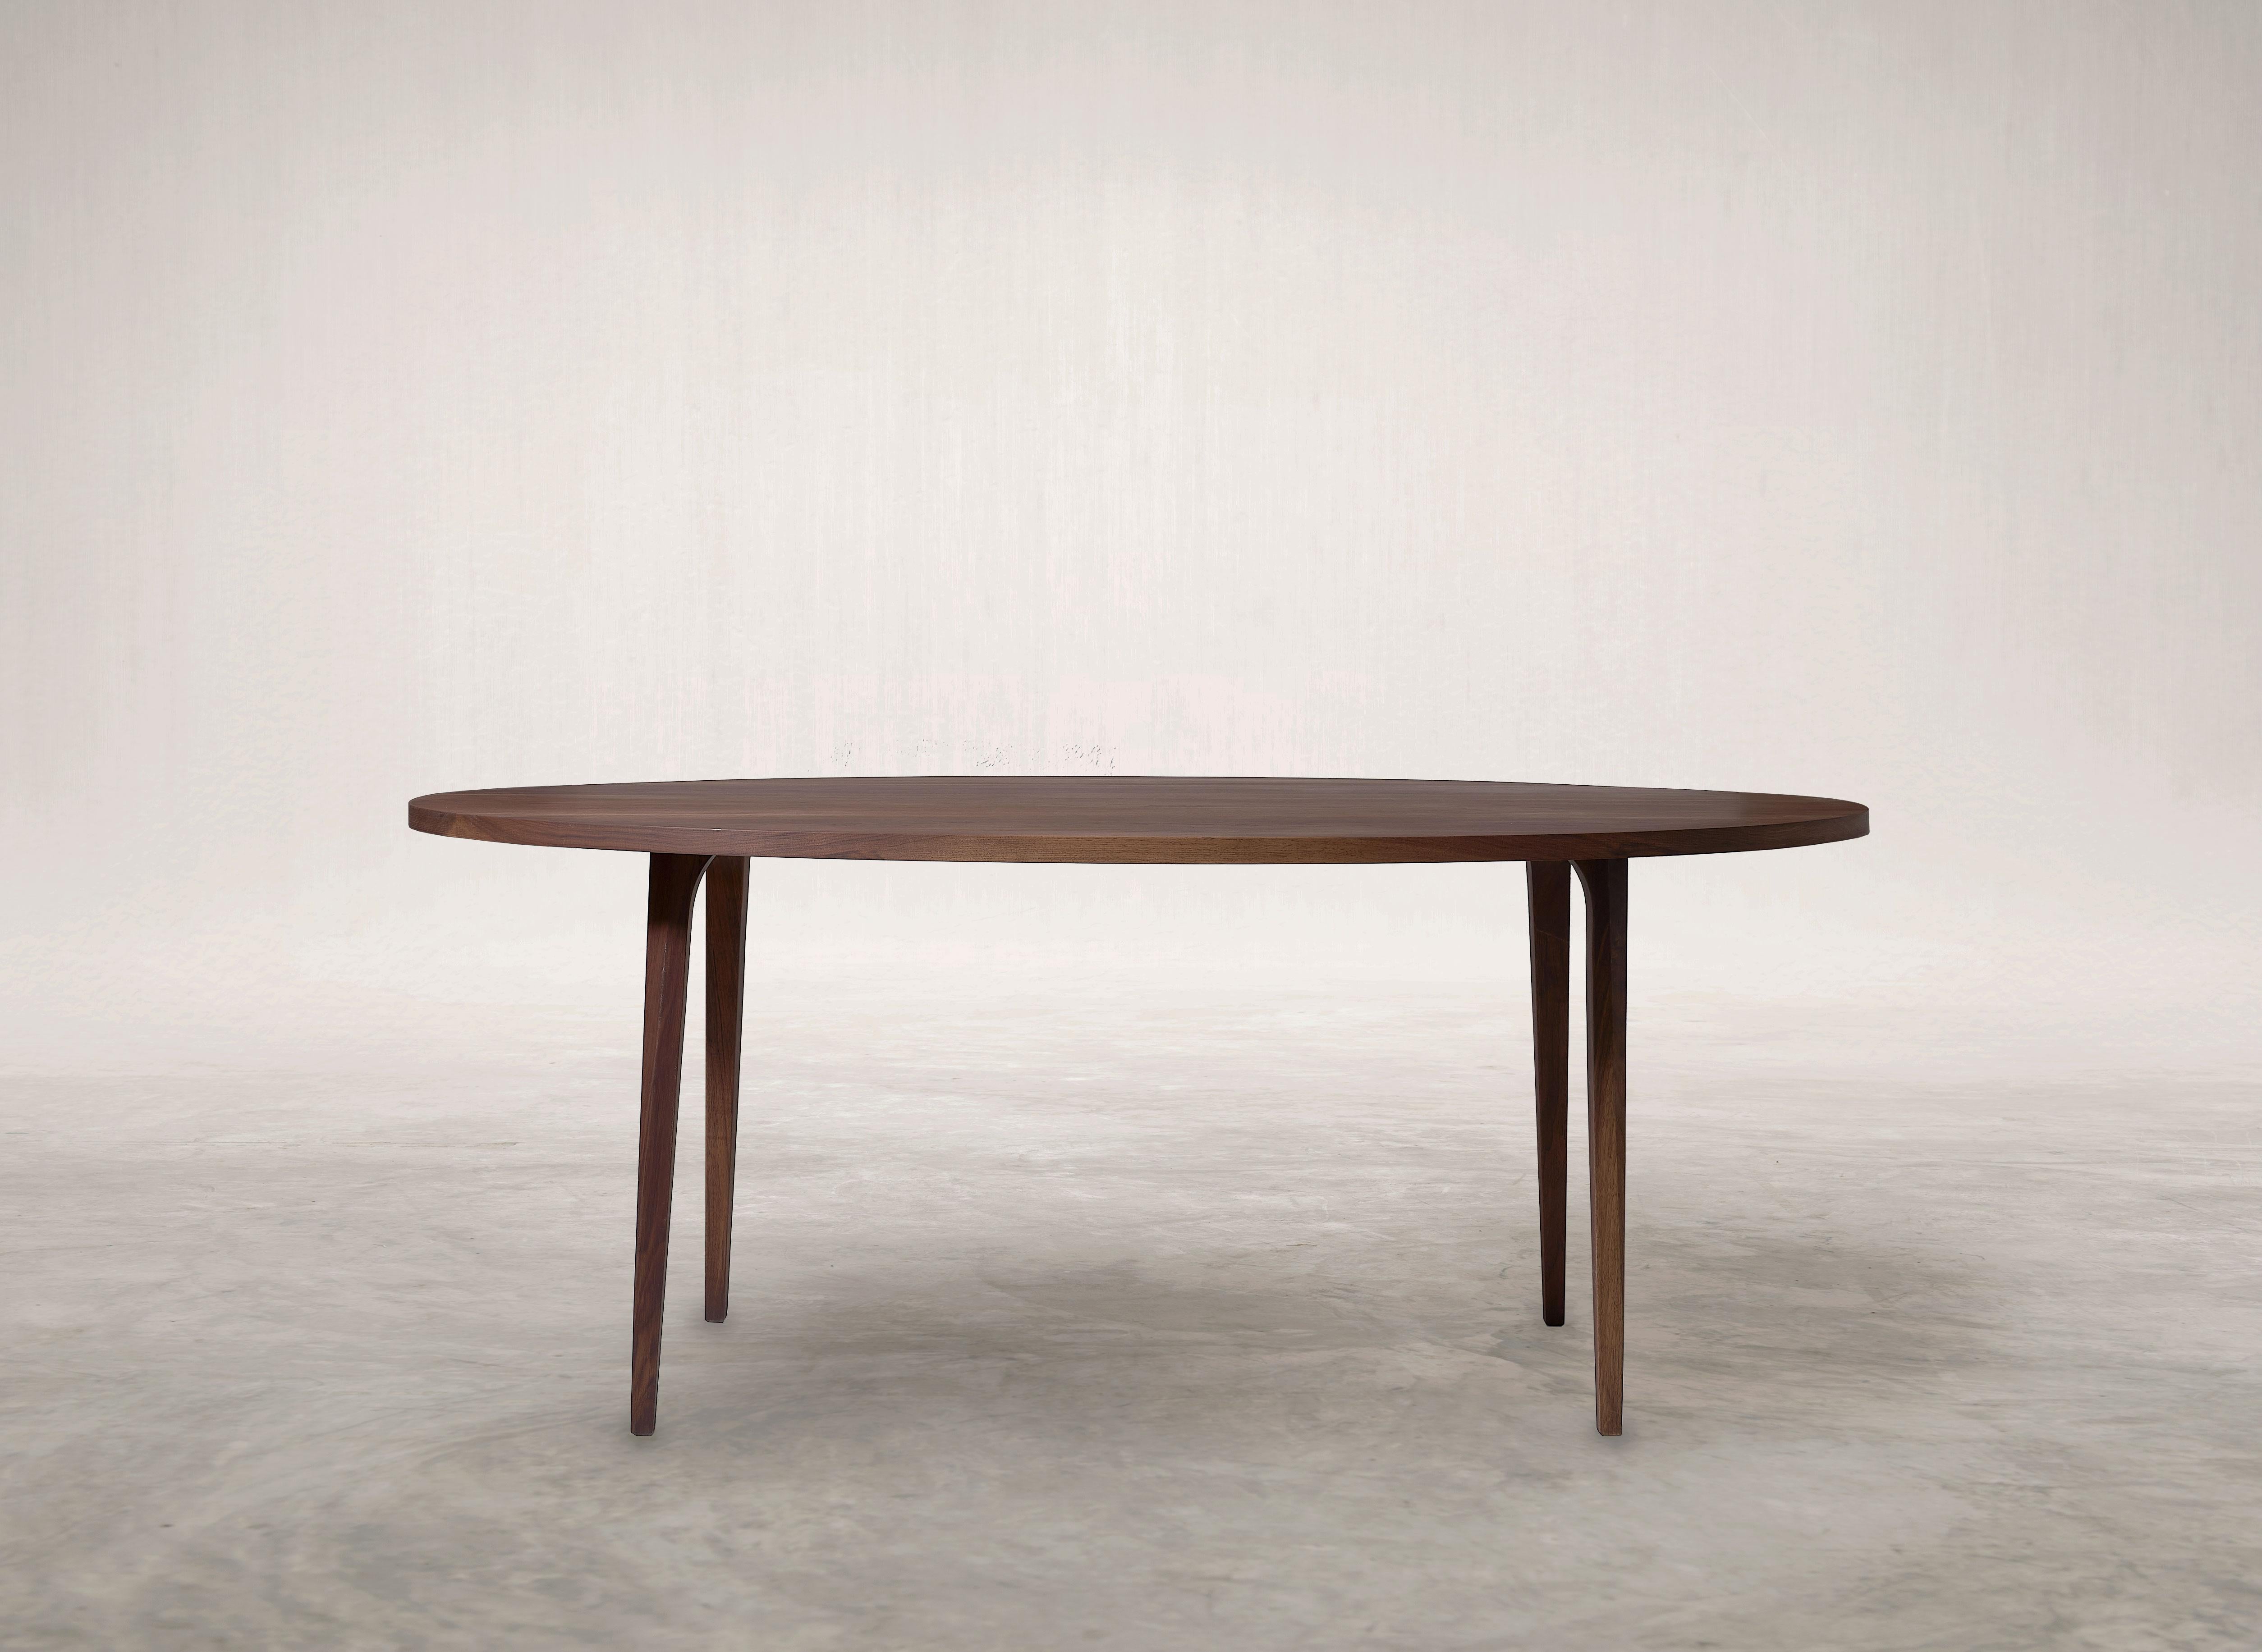 Qaws Dining Table by Selma Lazrak
Dimensions: D 223 x W 104 x H 74 cm 
Materials: Solid American walnut.

The term Qaws is used to describe arches of various shapes and sizes, commonly found in buildings like palaces, and historic structures